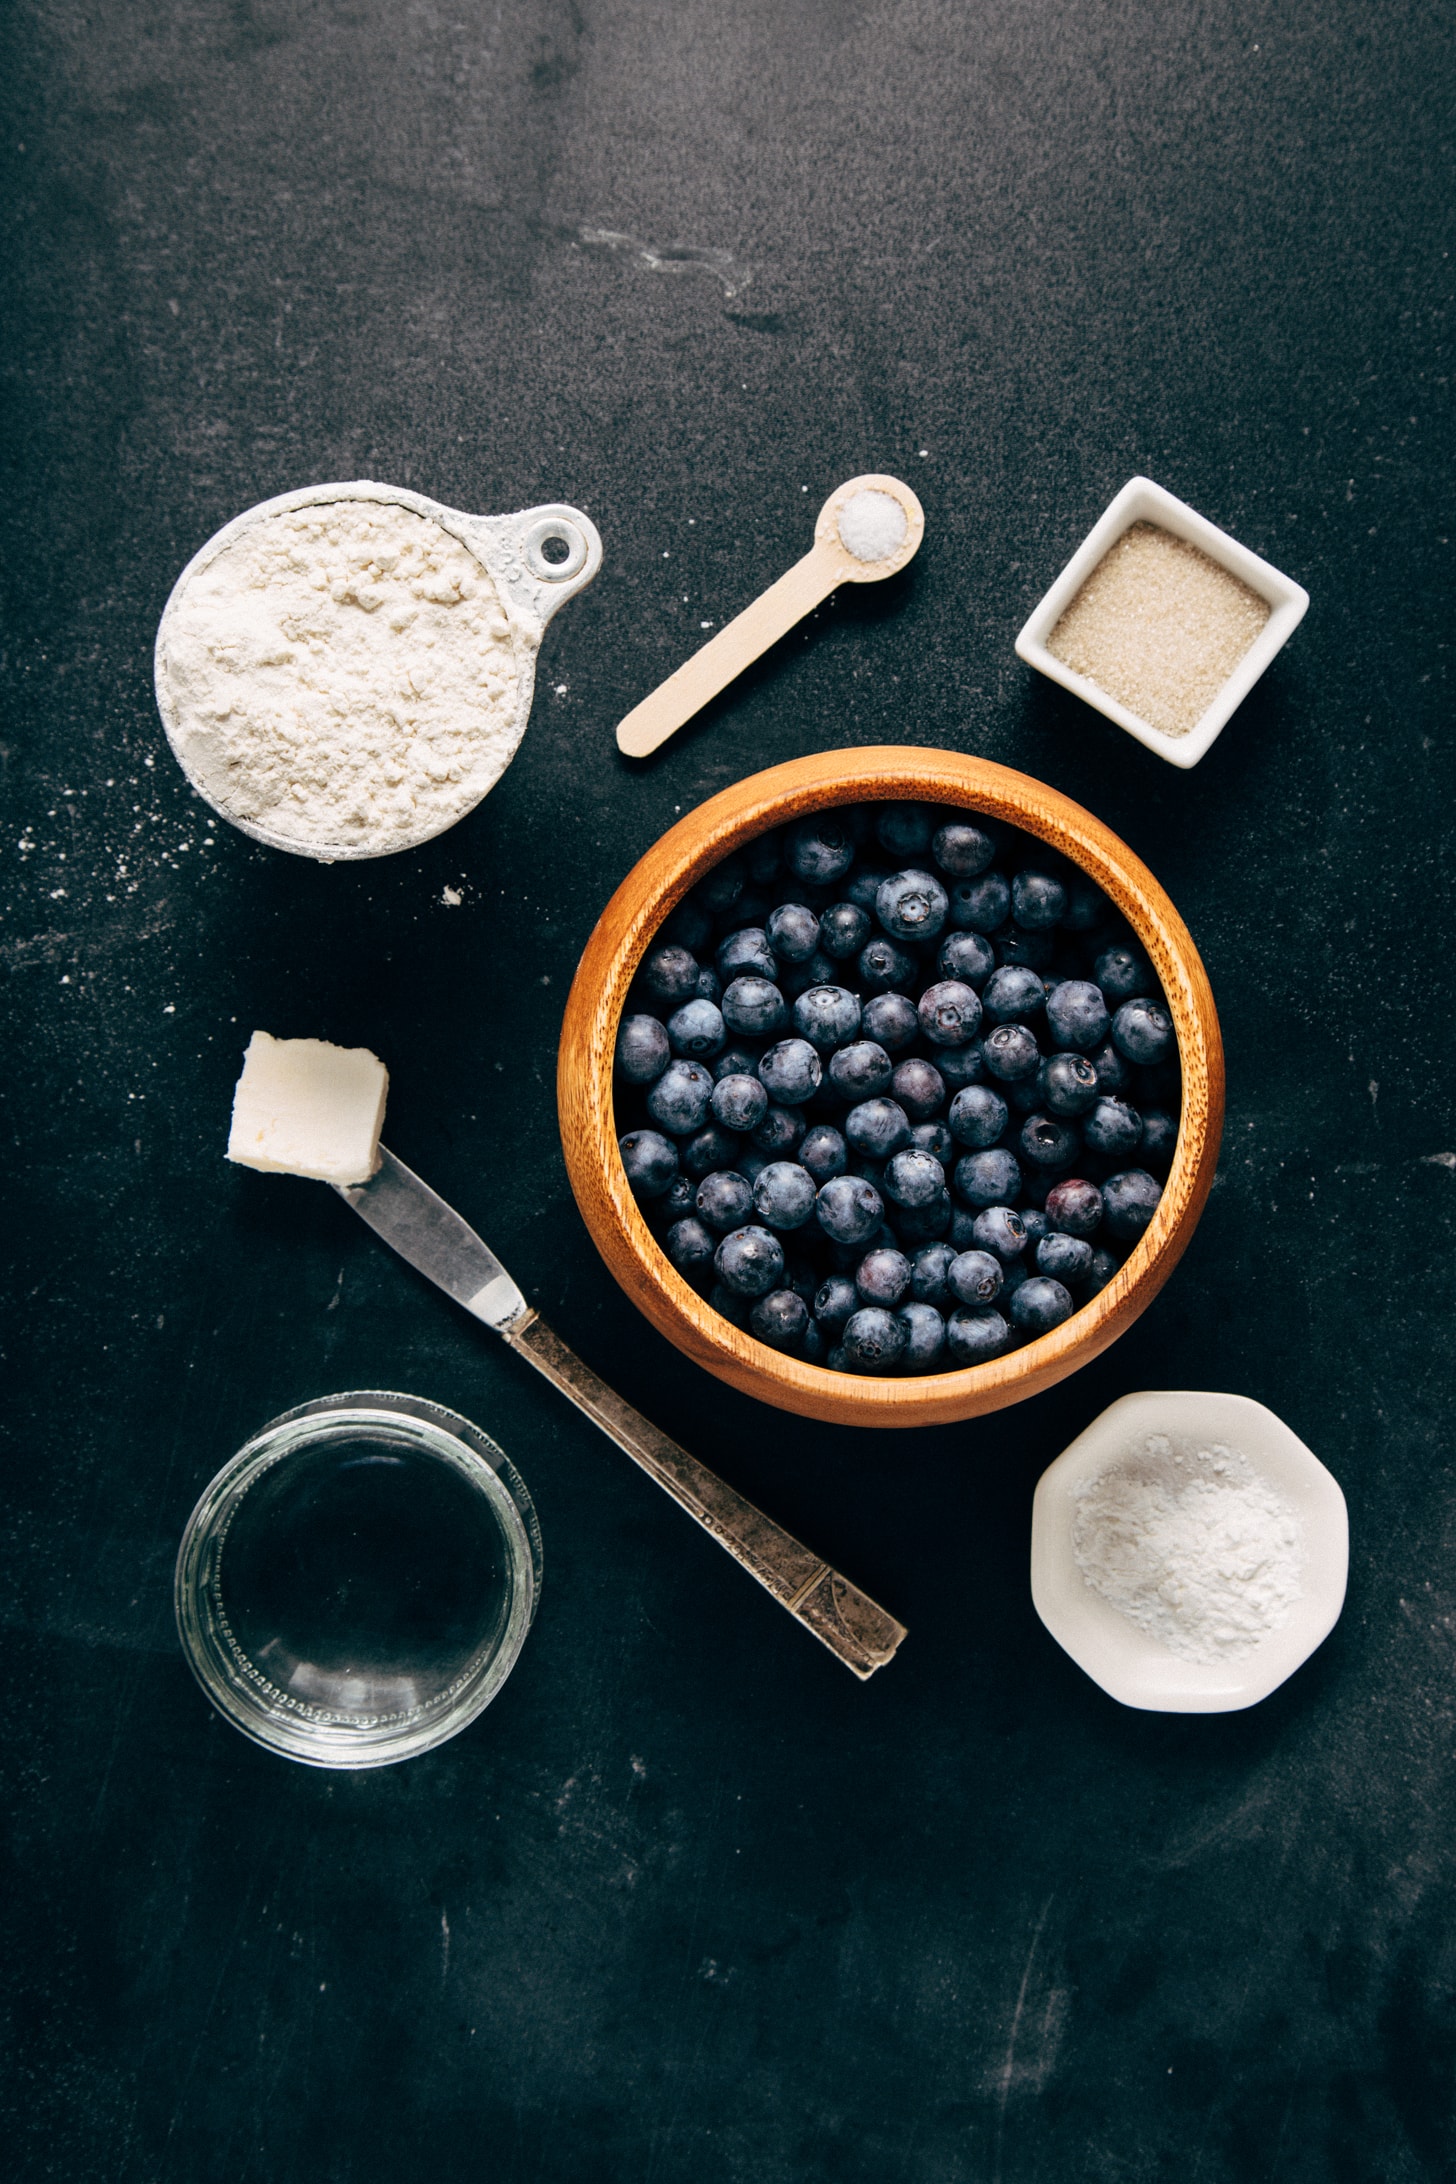 Assortment of ingredients for making simple vegan gluten-free Mini Blueberry Galettes